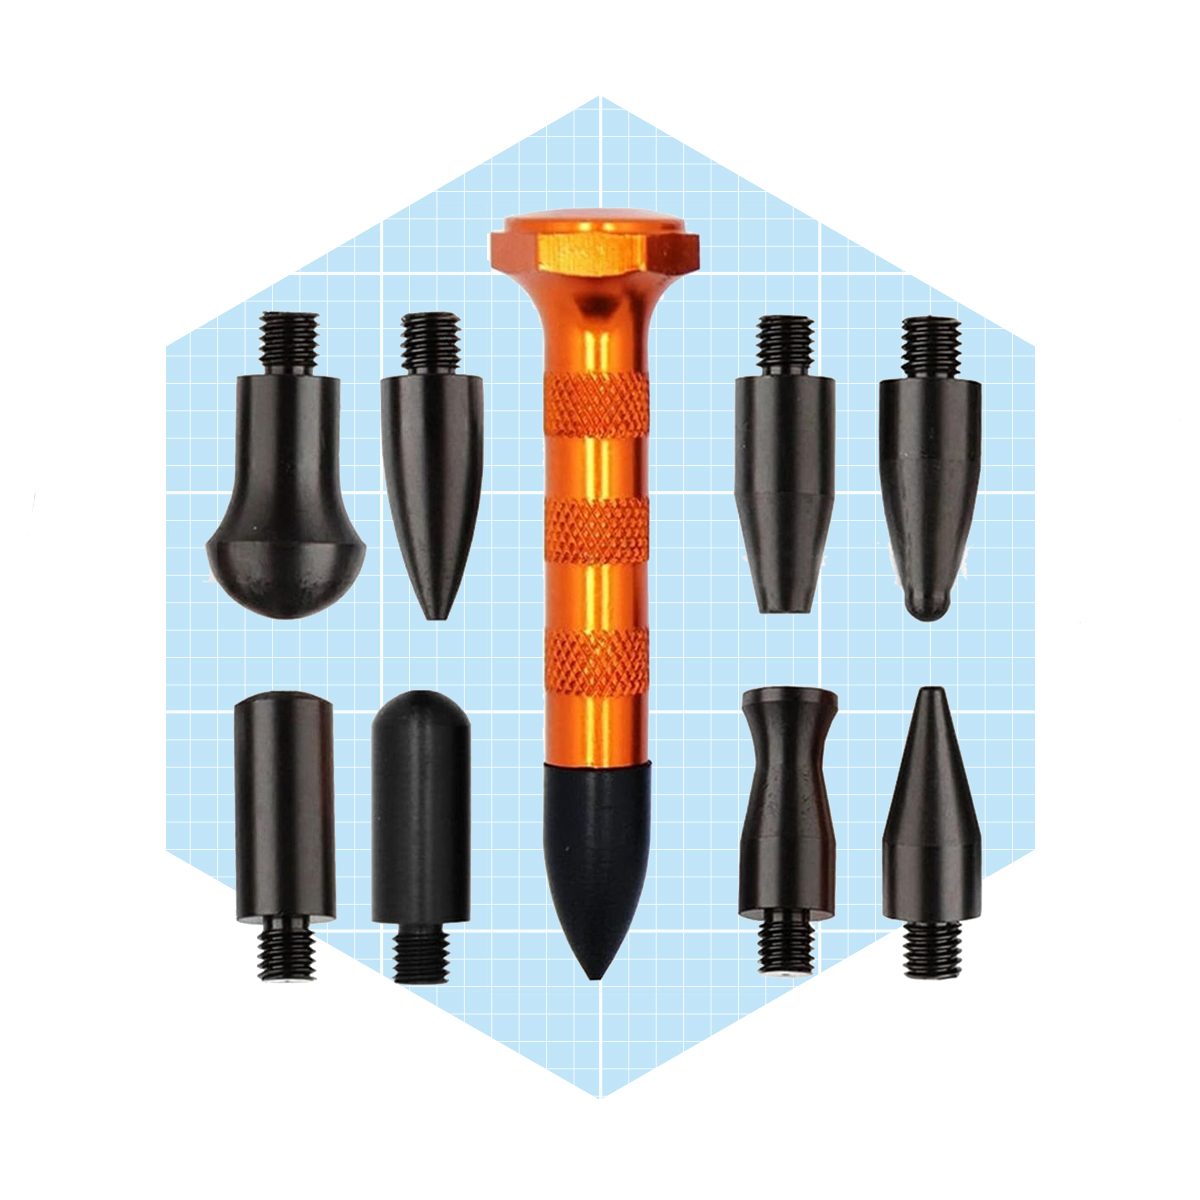 Reliable Carbon Steel Shock absorber removal tool for upgrade- My Dentist